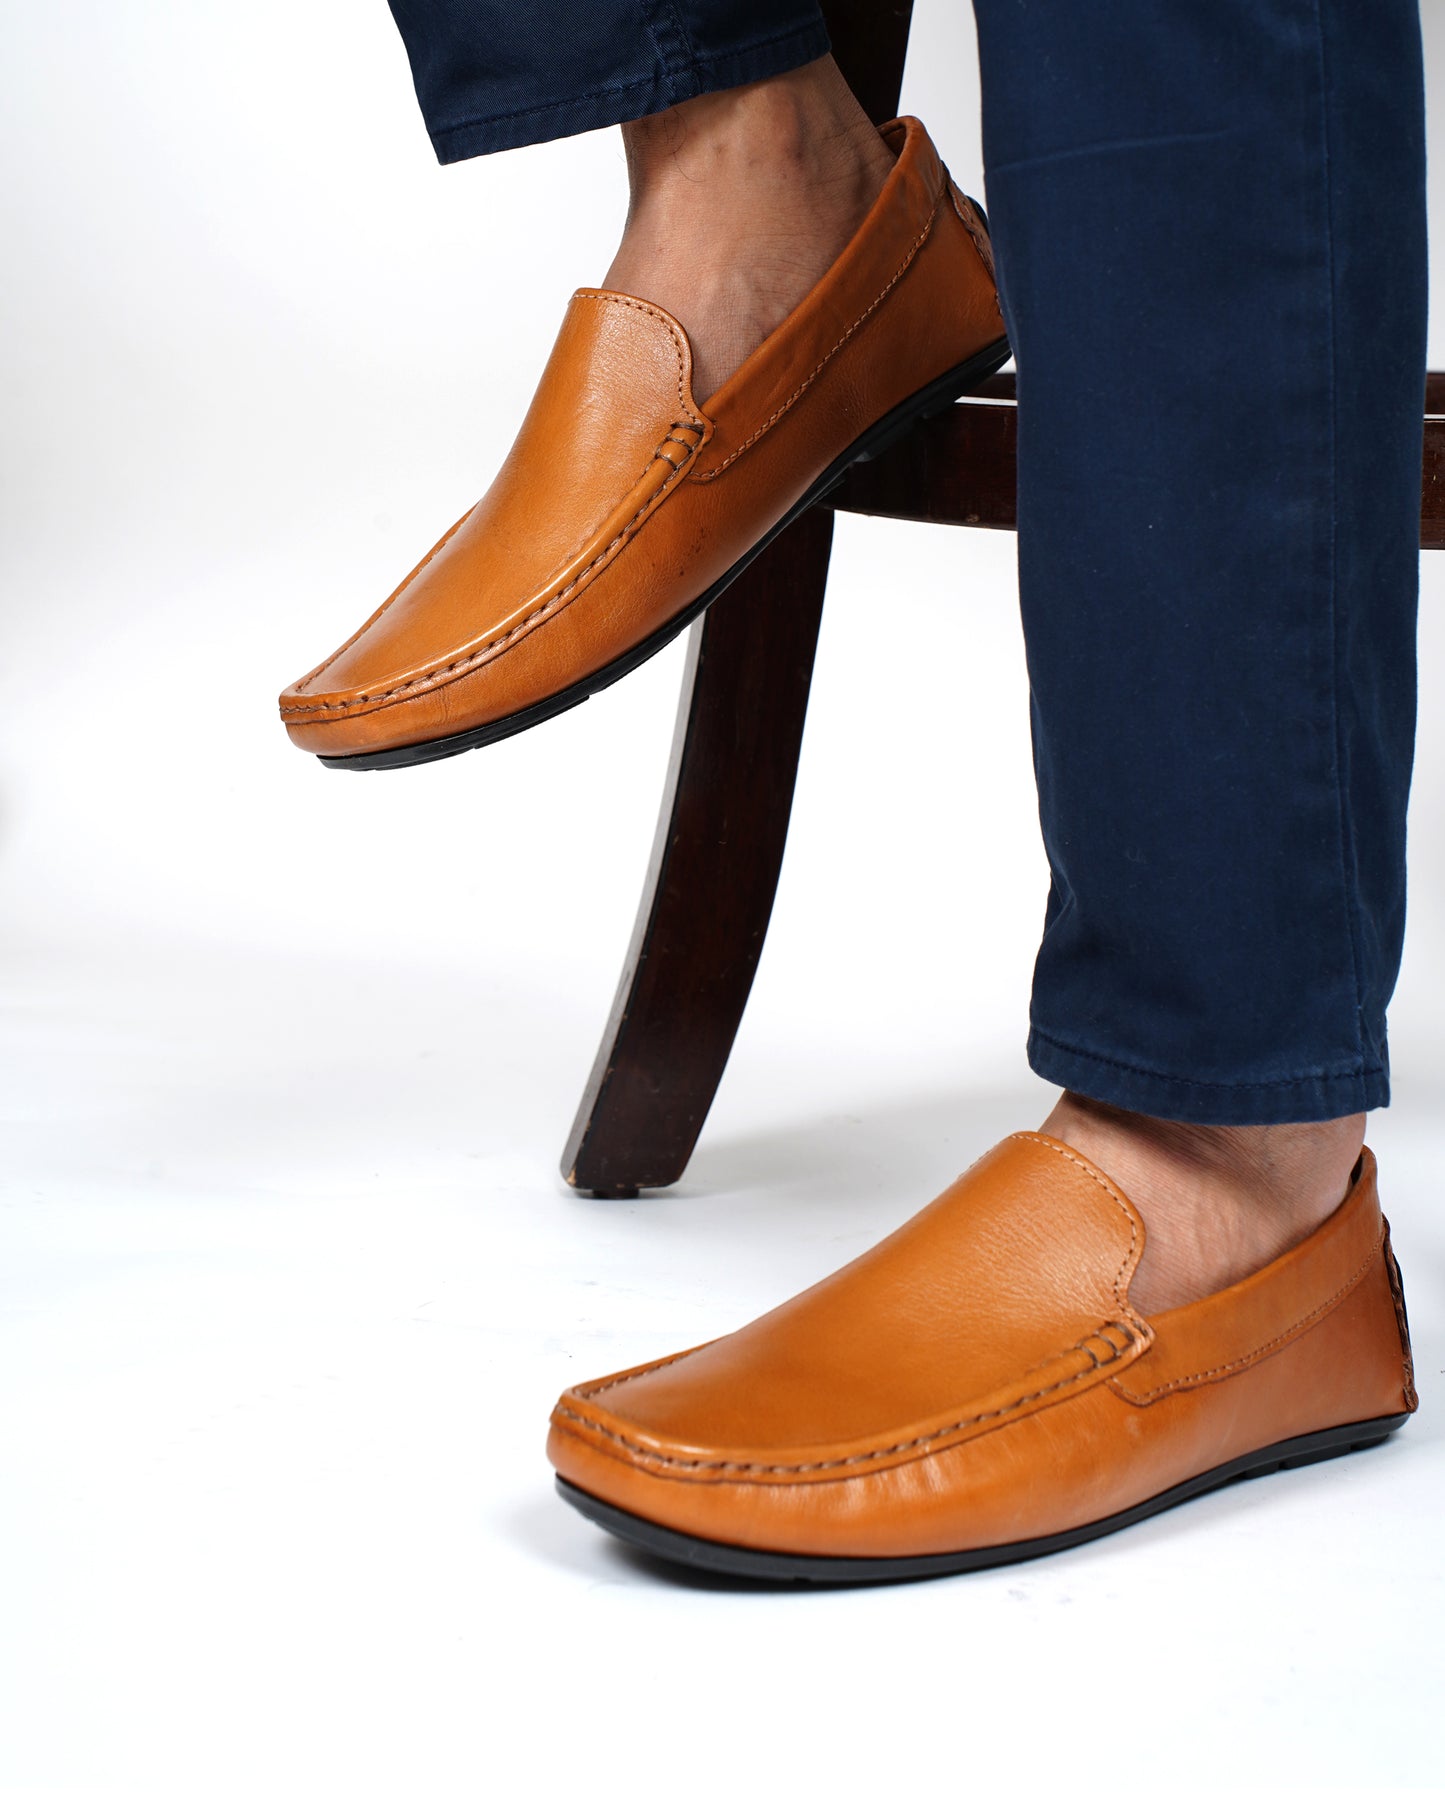 Day-To-Day Basic Loafers